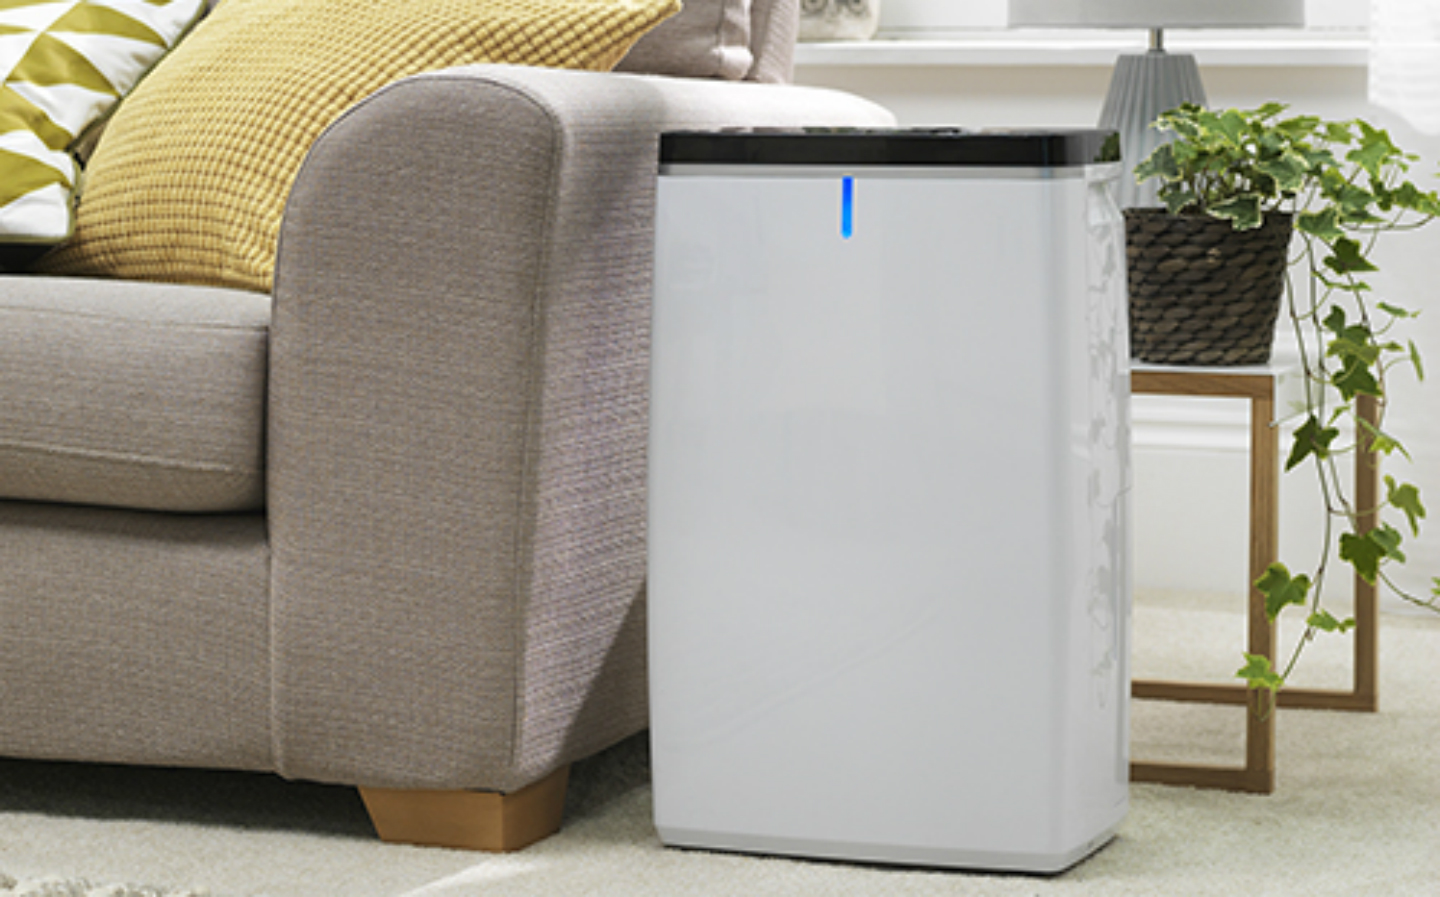 Products: Dehumidifiers for garages and homes reviewed